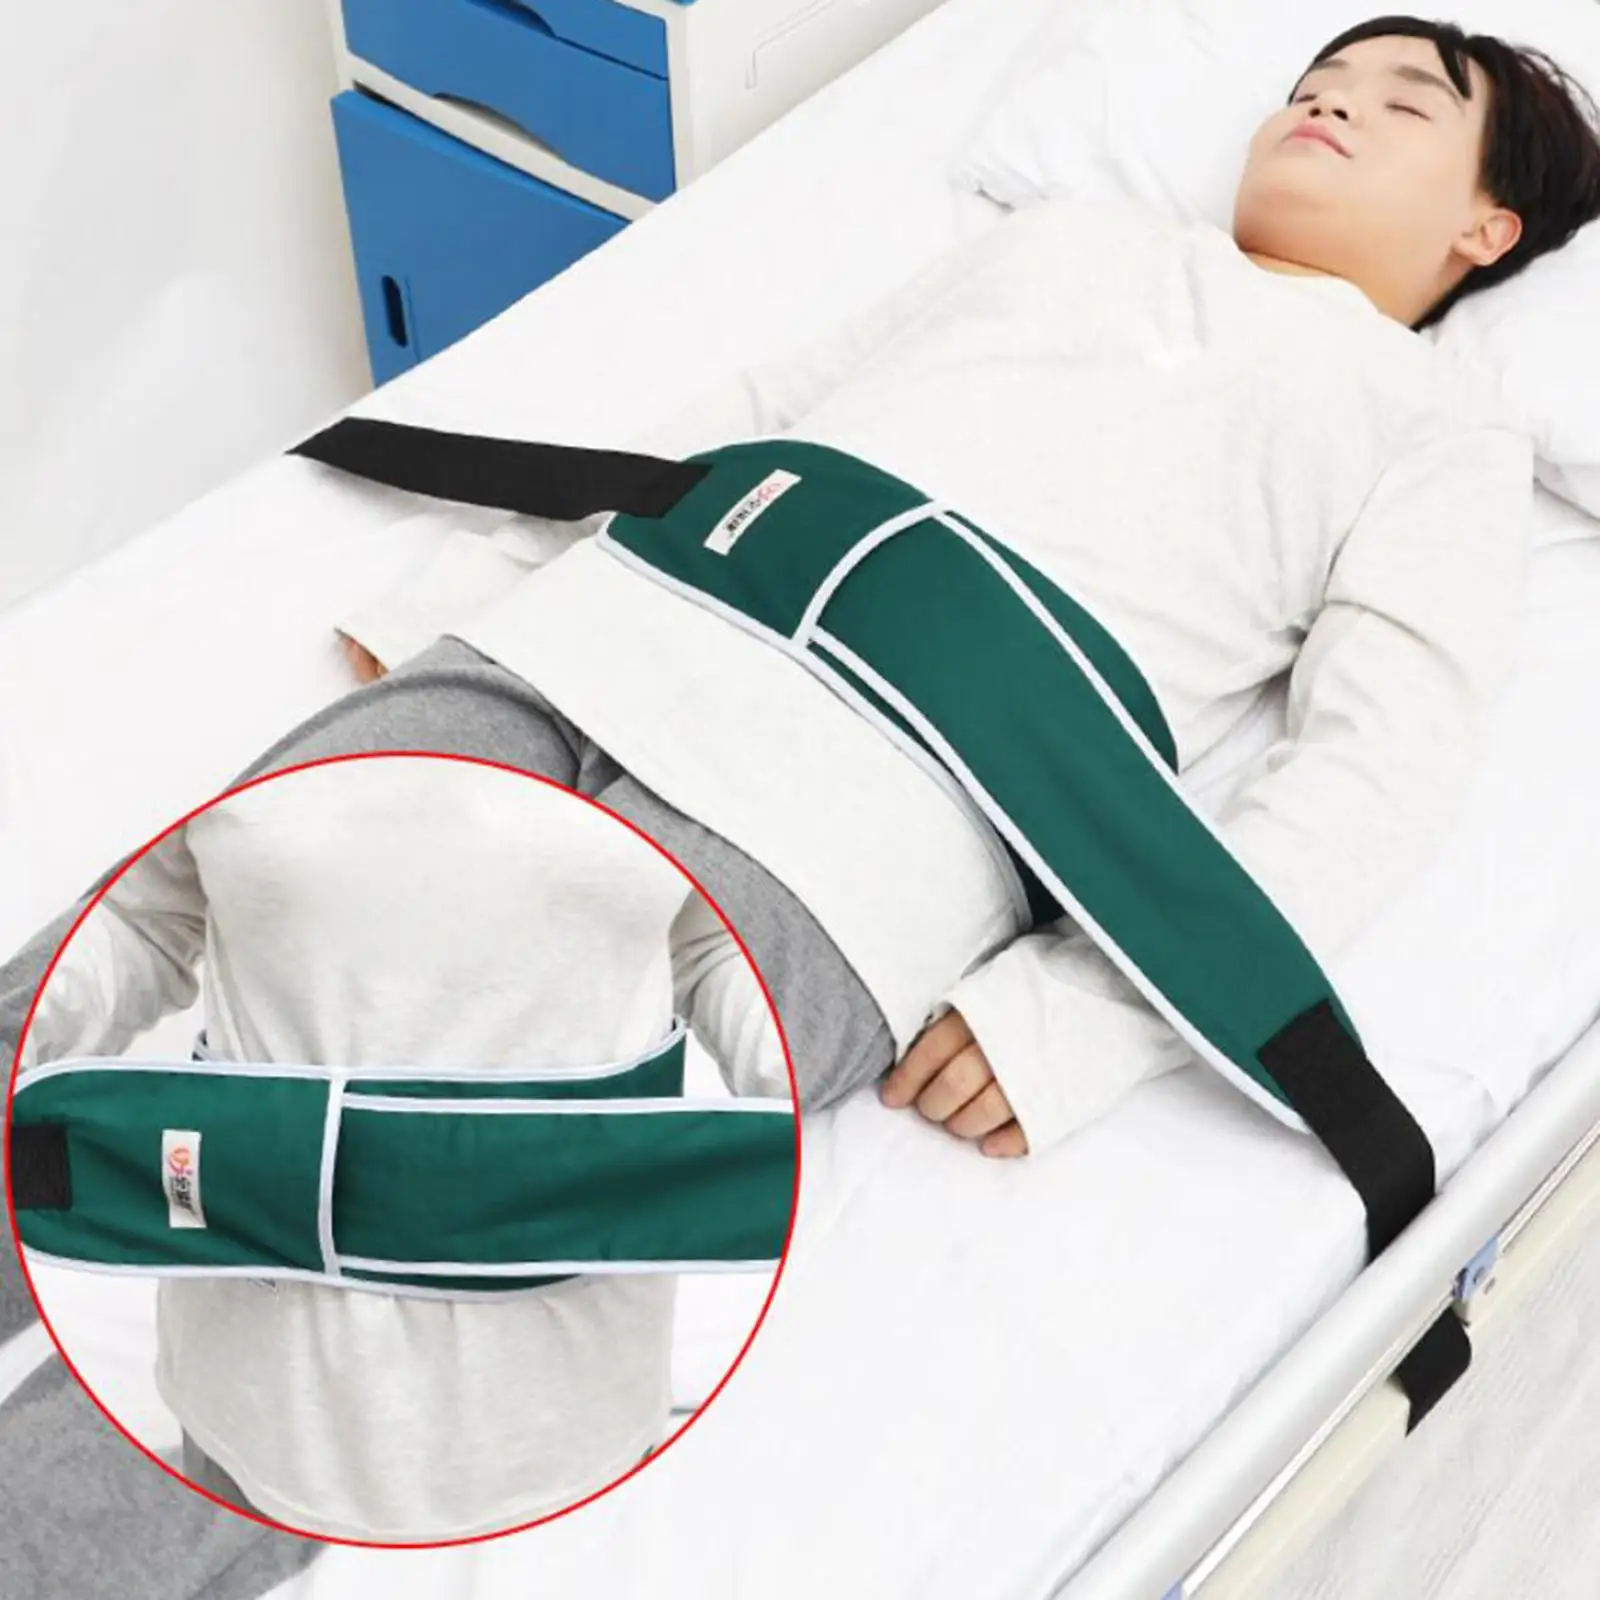 Bed Restraining Strap Fall Prevention Waist Belt for Patient